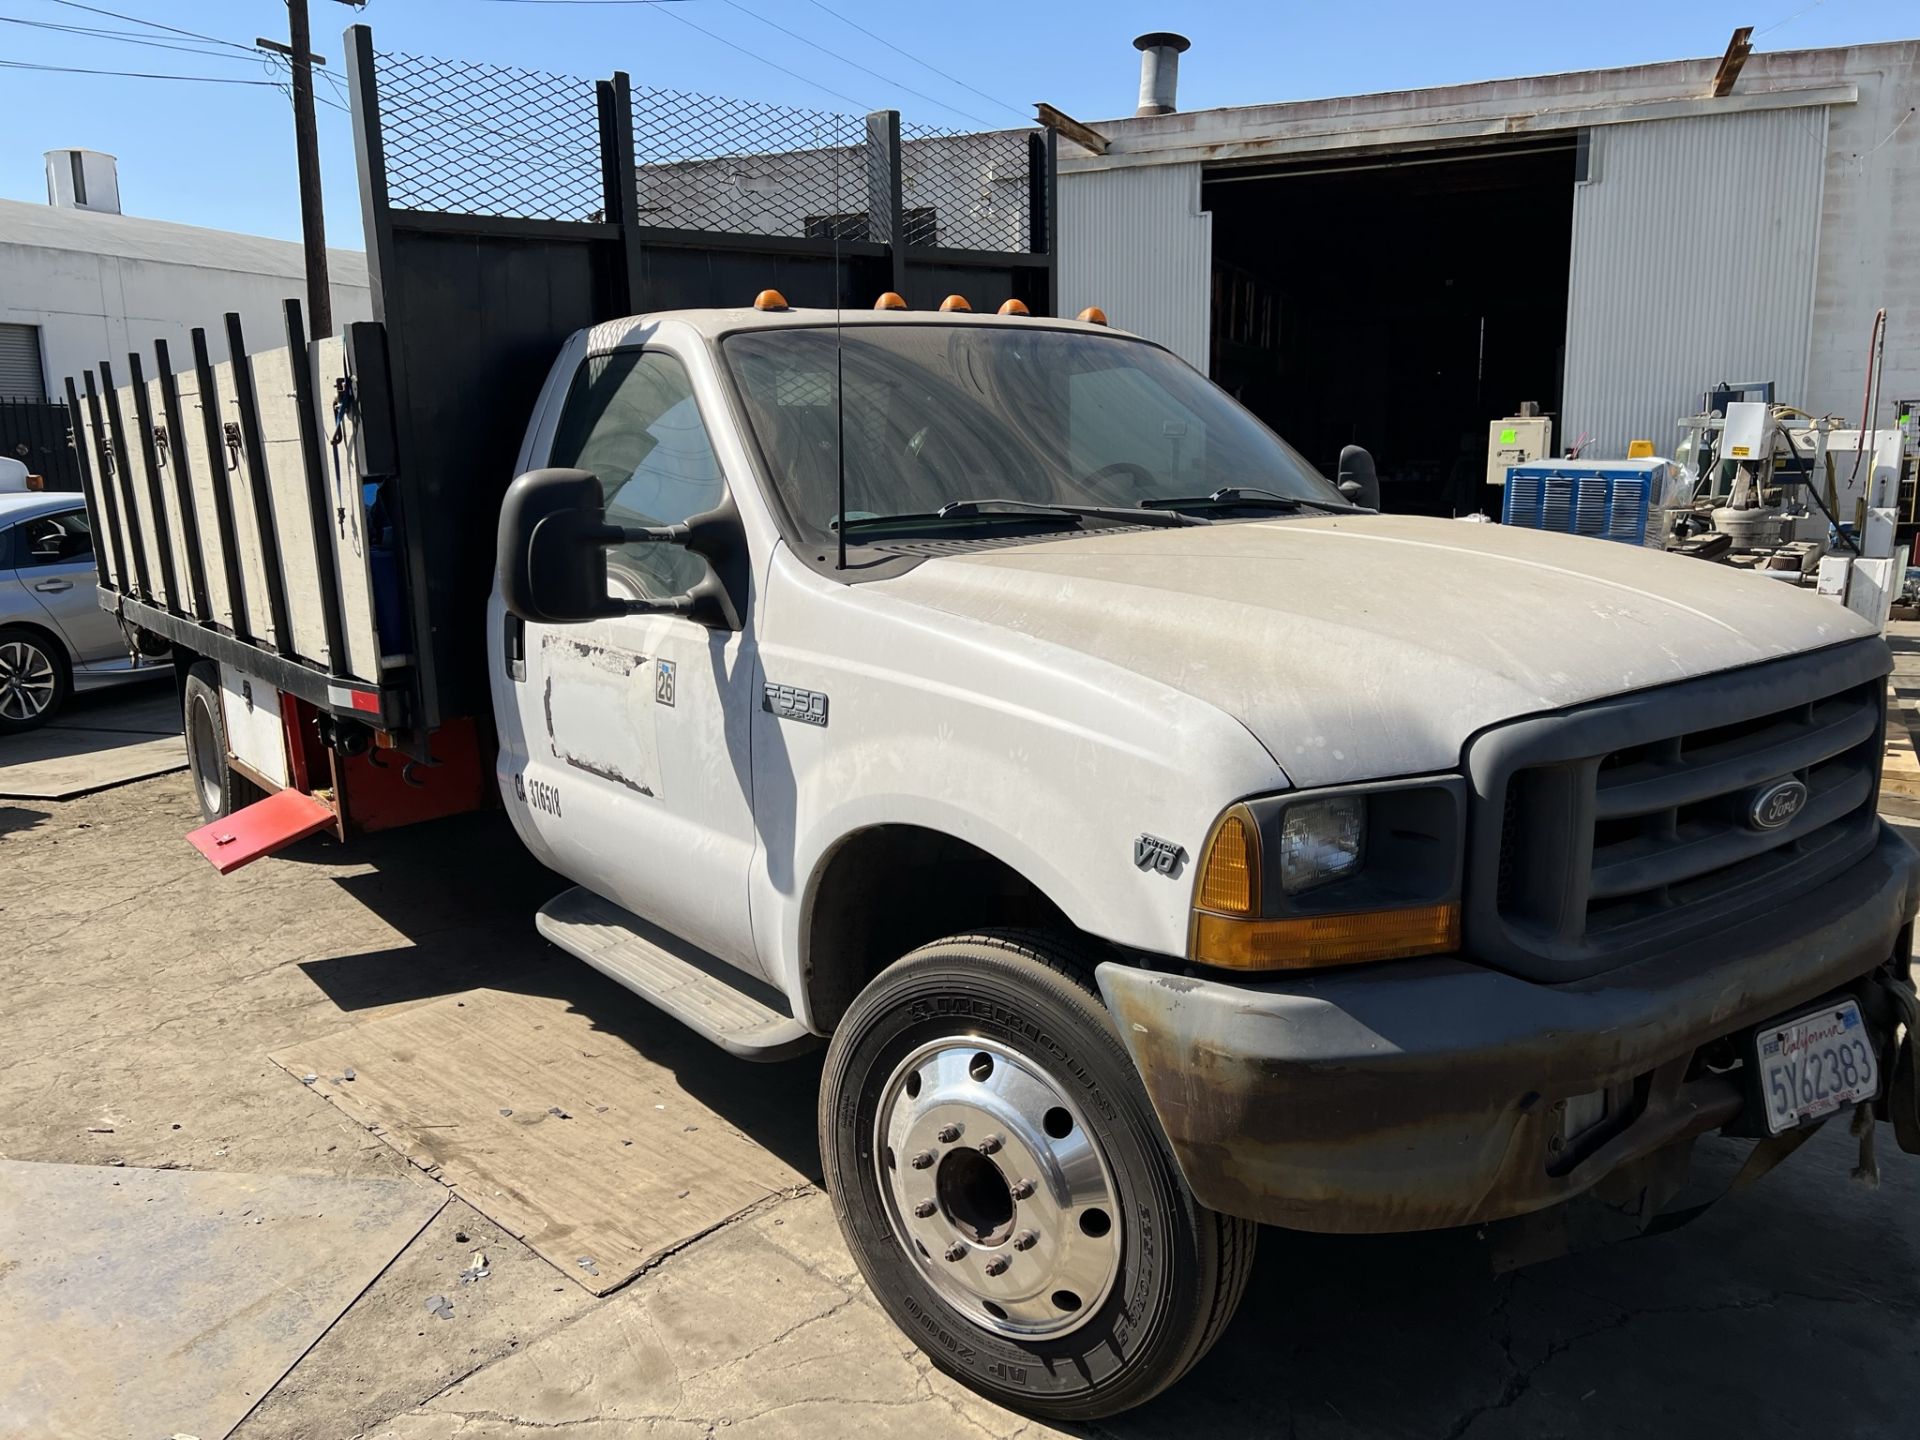 1999 FORD F550 SUPER DUTY, STAKE BED TRUCK, 16' BED, ENGINE NEEDS WORK, GASOLINE 6.8L ENGINE, GOOD